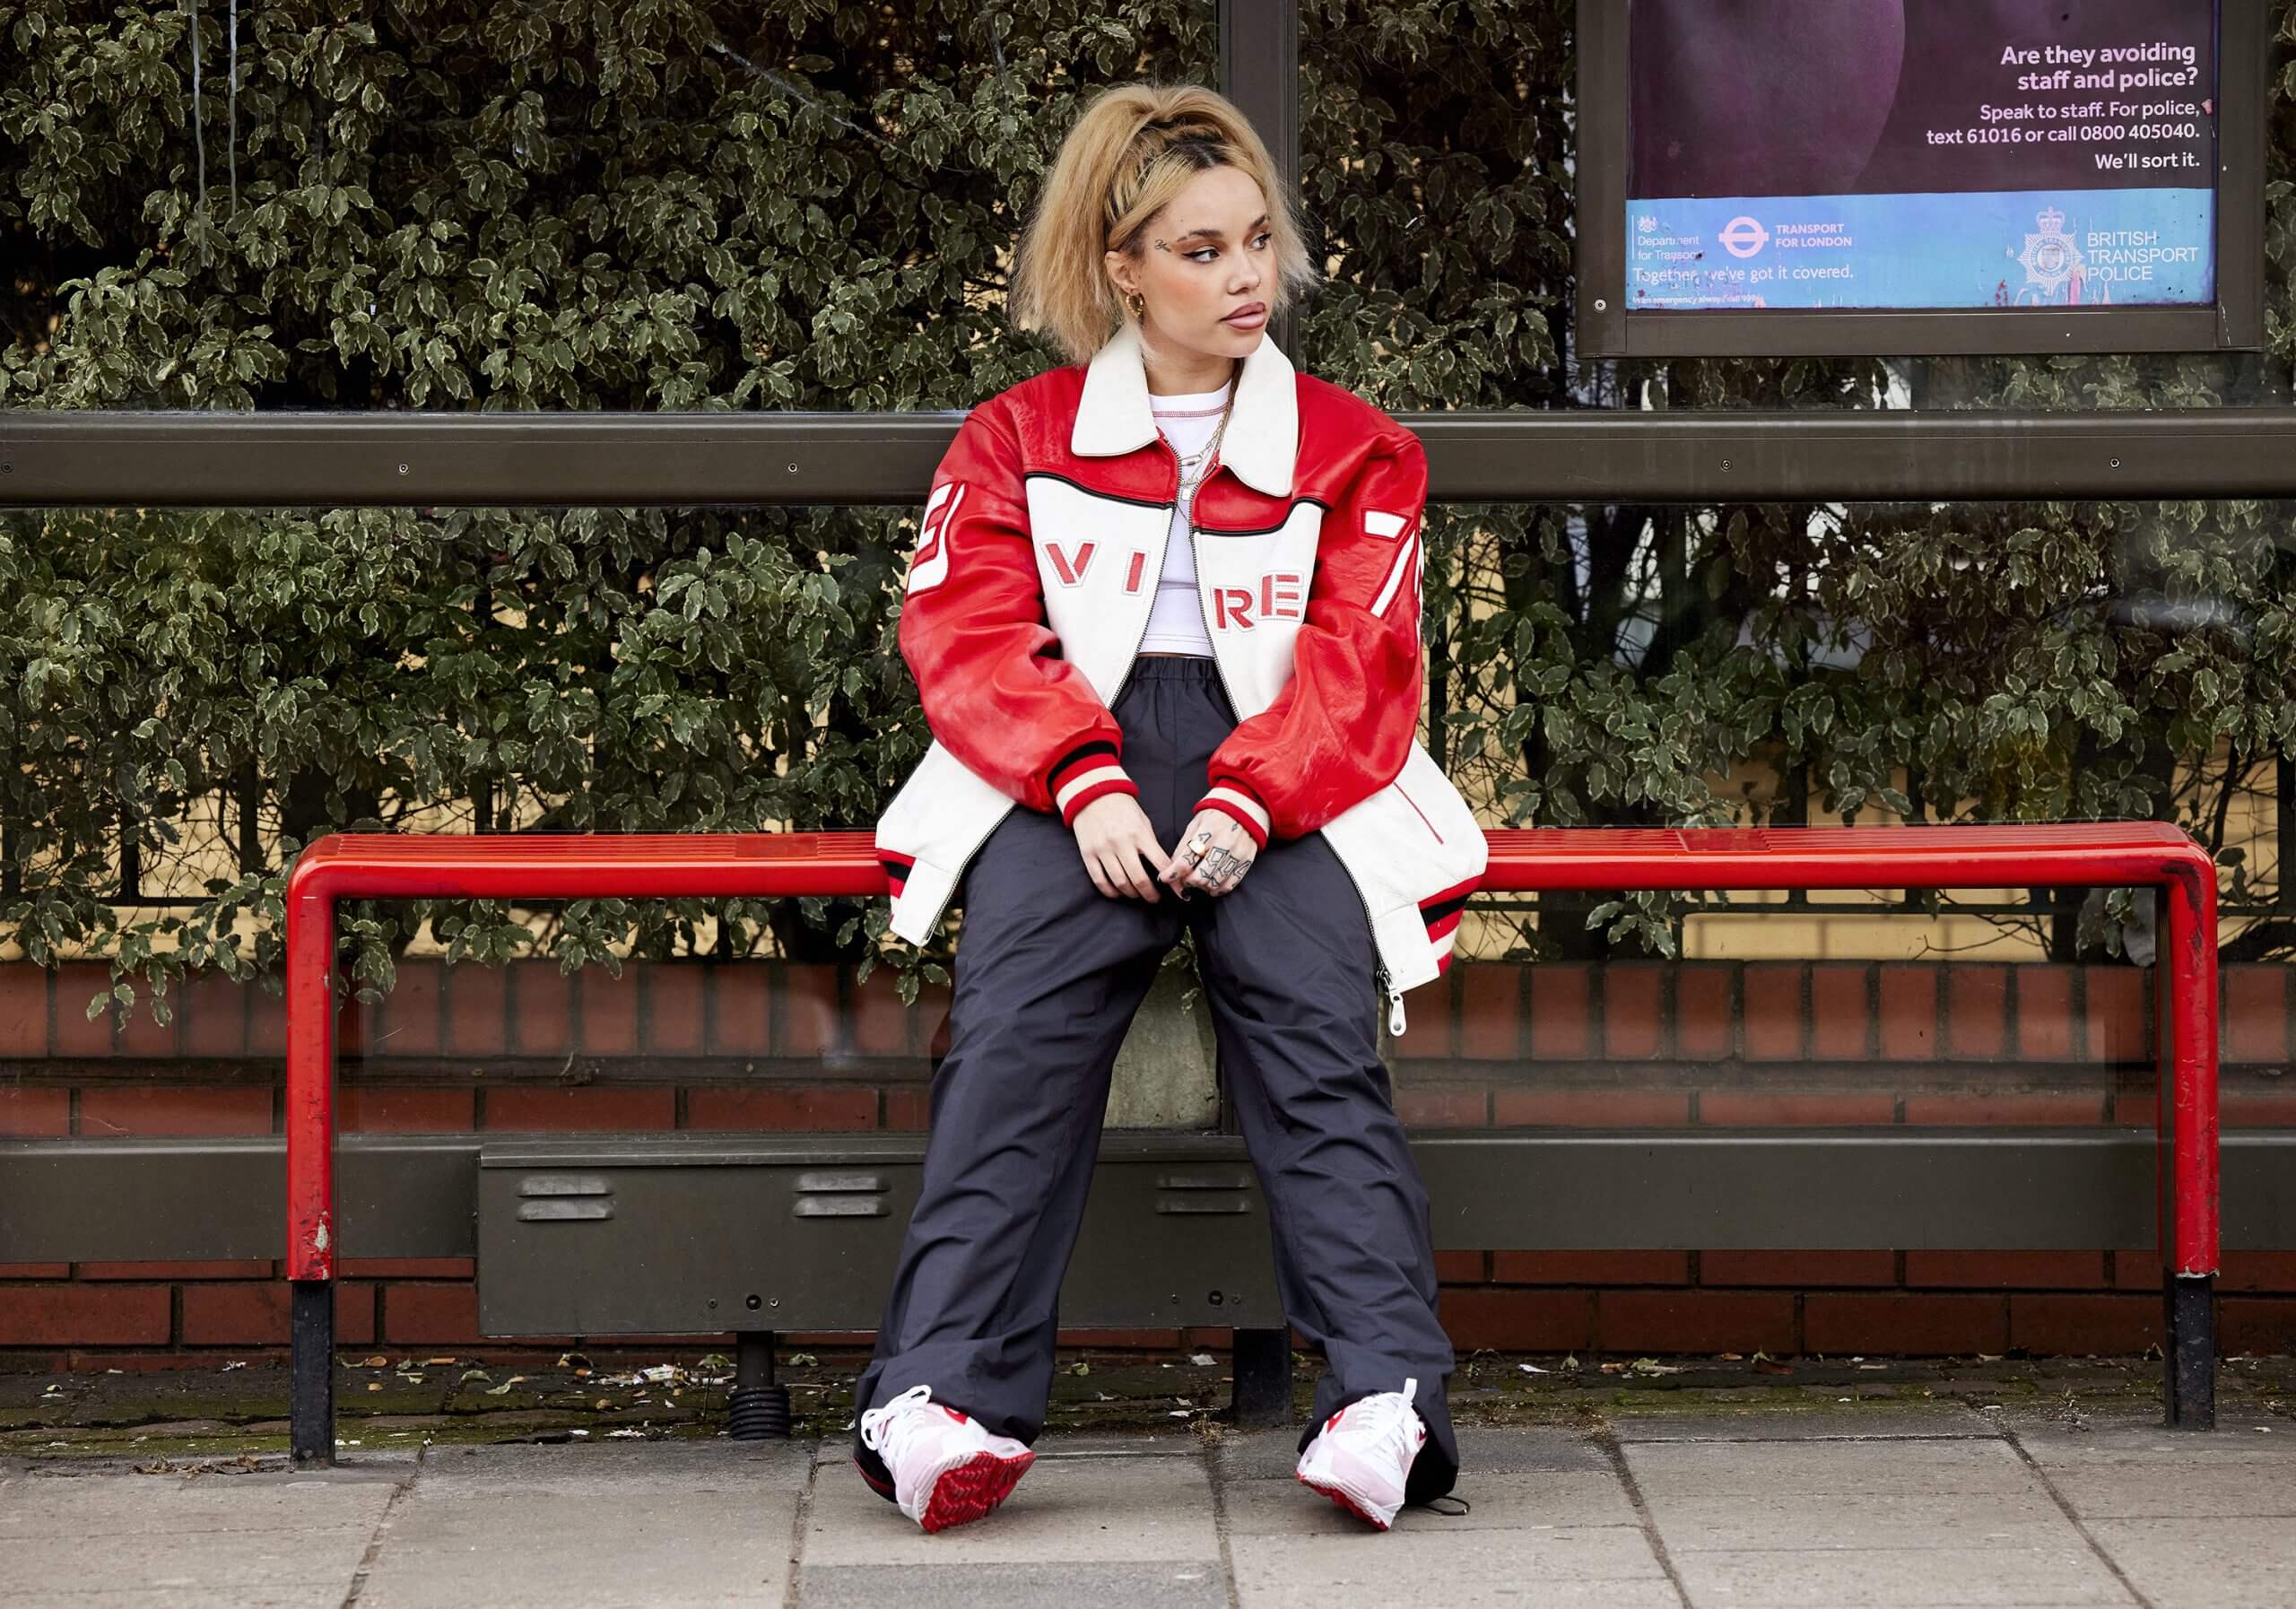 JGRREY sitting at a bus stop on a red bench